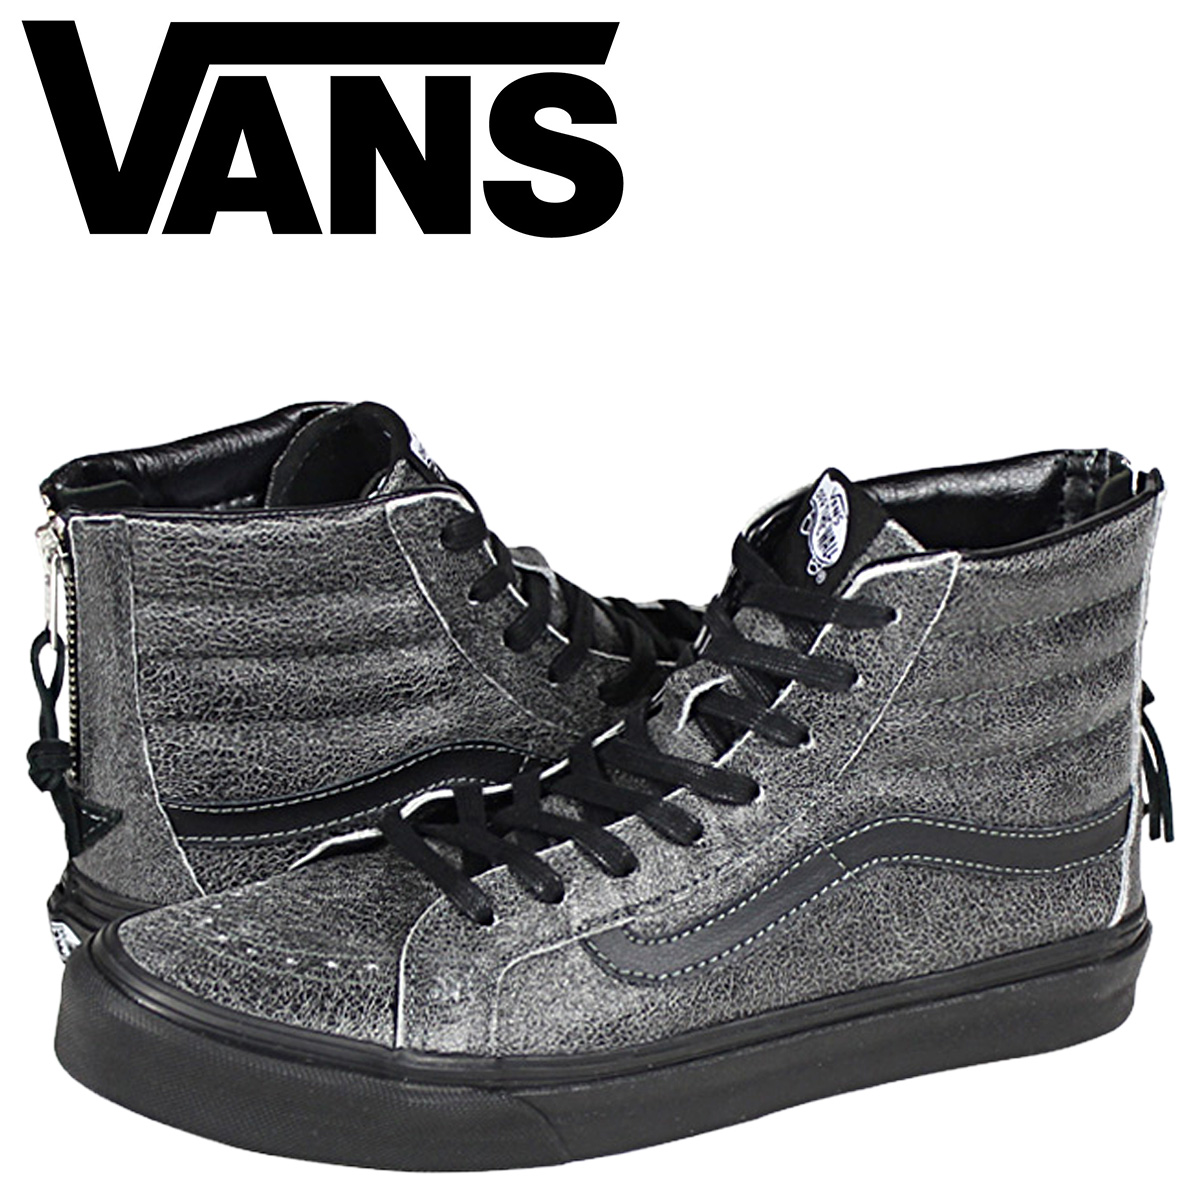 VANS station wagons sneakers Lady's SK8 